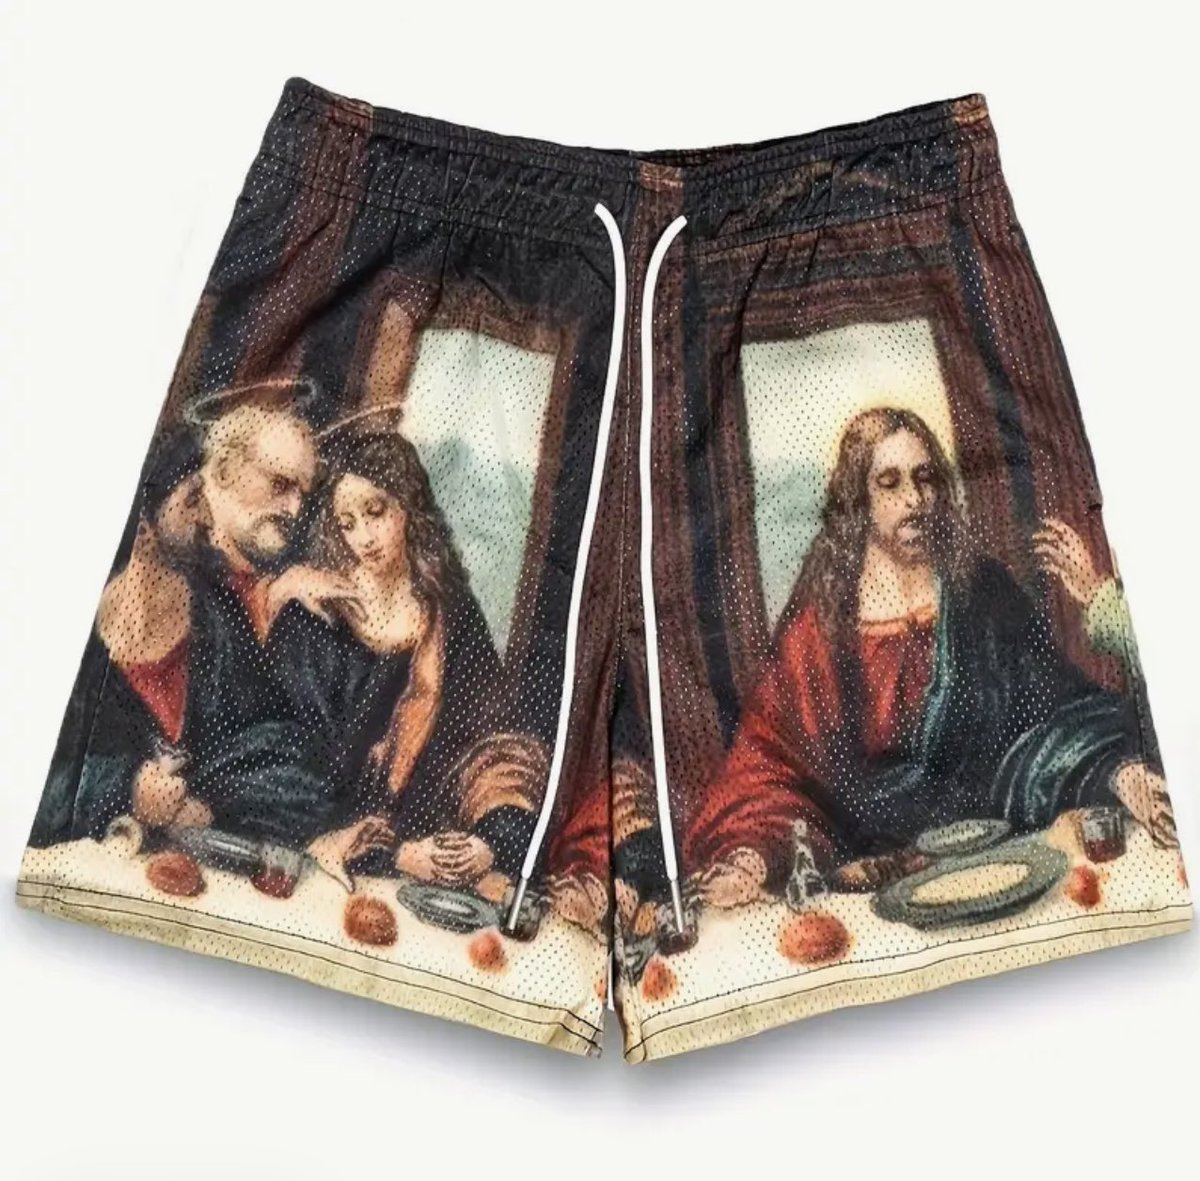 In case you want to own the most tasteless shorts on earth, you need look no further than Temu for these beauties. $4.99 and your search is complete.